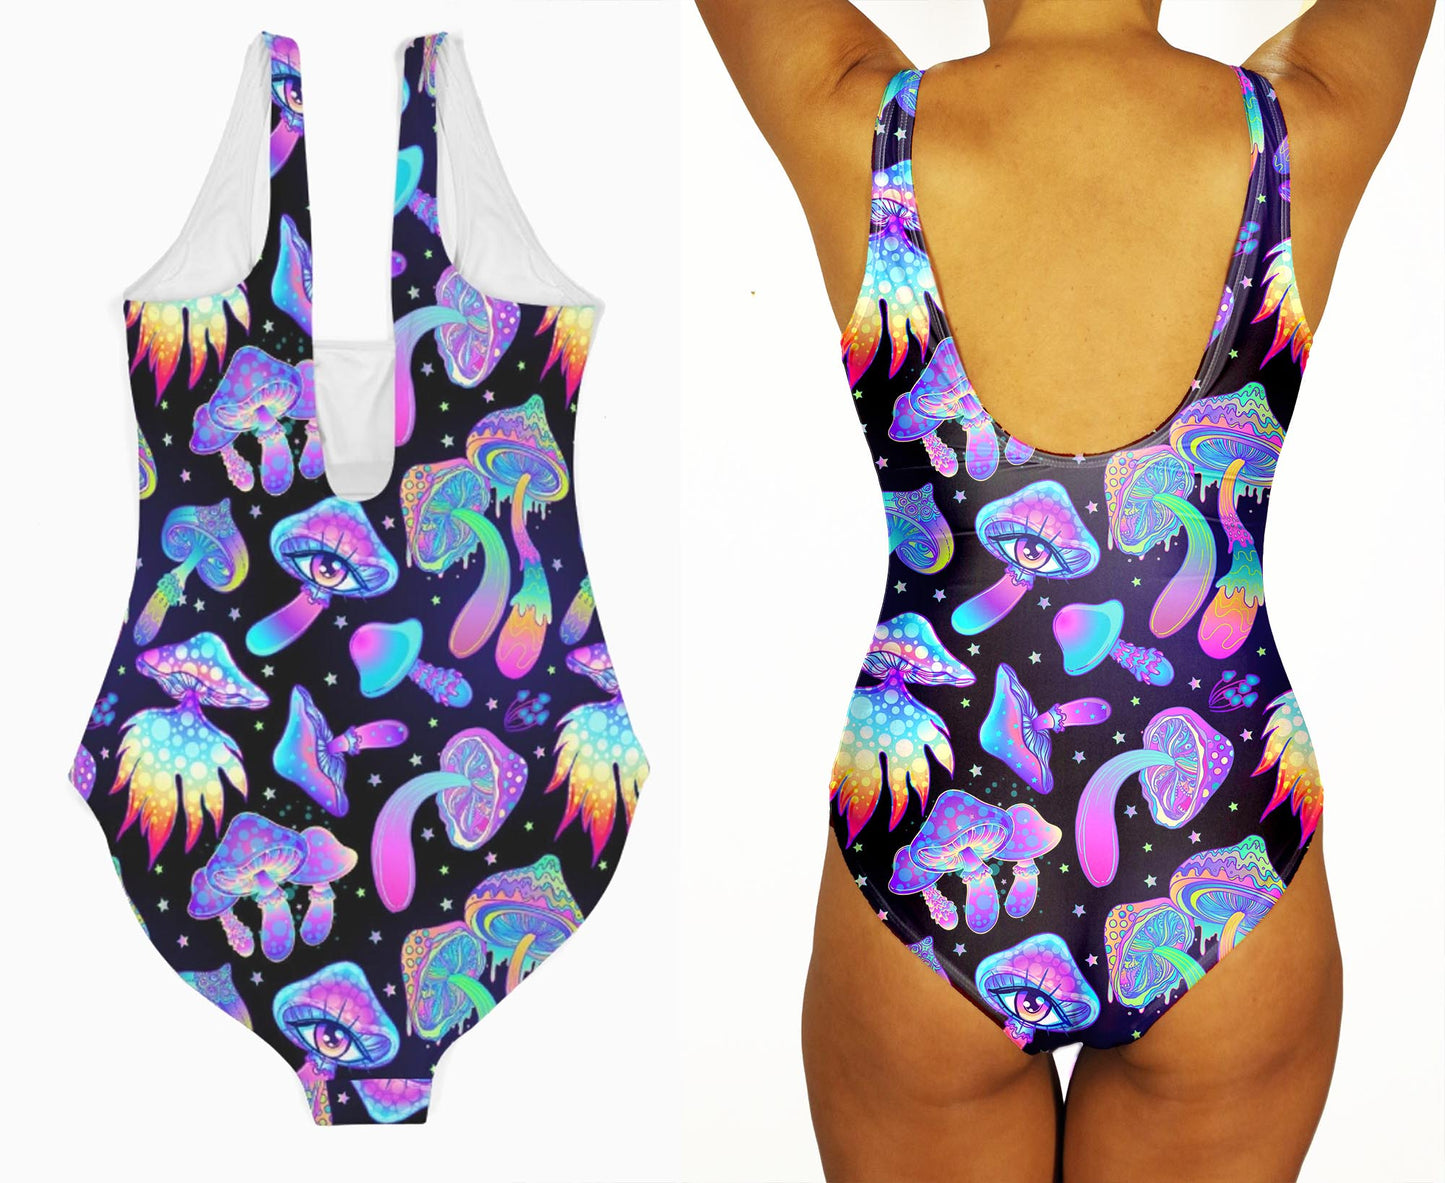 Mushroom Swimsuit:  Rave and Festival One Piece Swimsuit